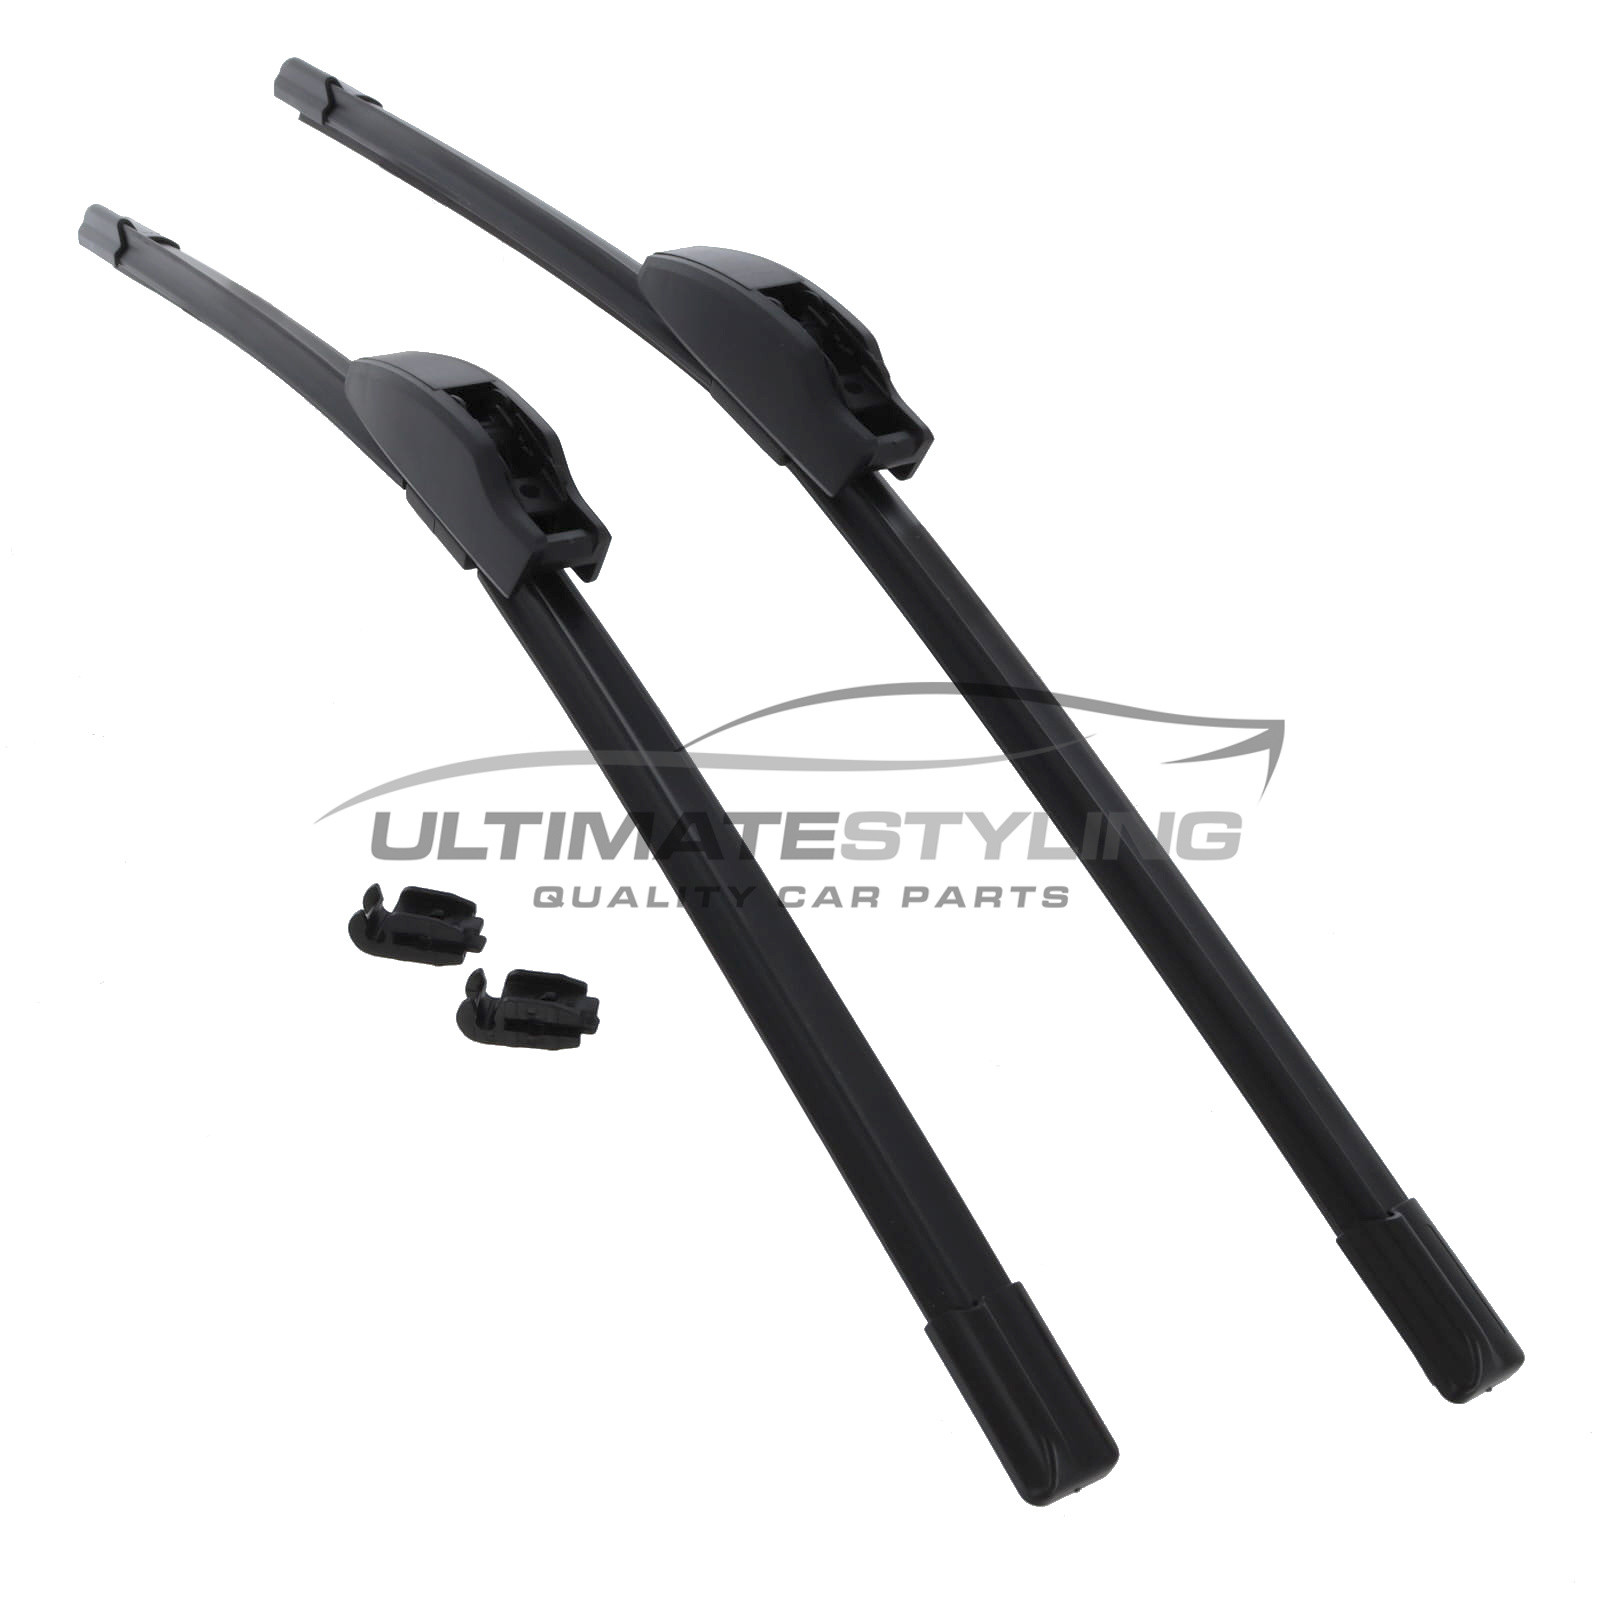 Drivers Side & Passenger Side (Front) Wiper Blades for Daihatsu Sirion